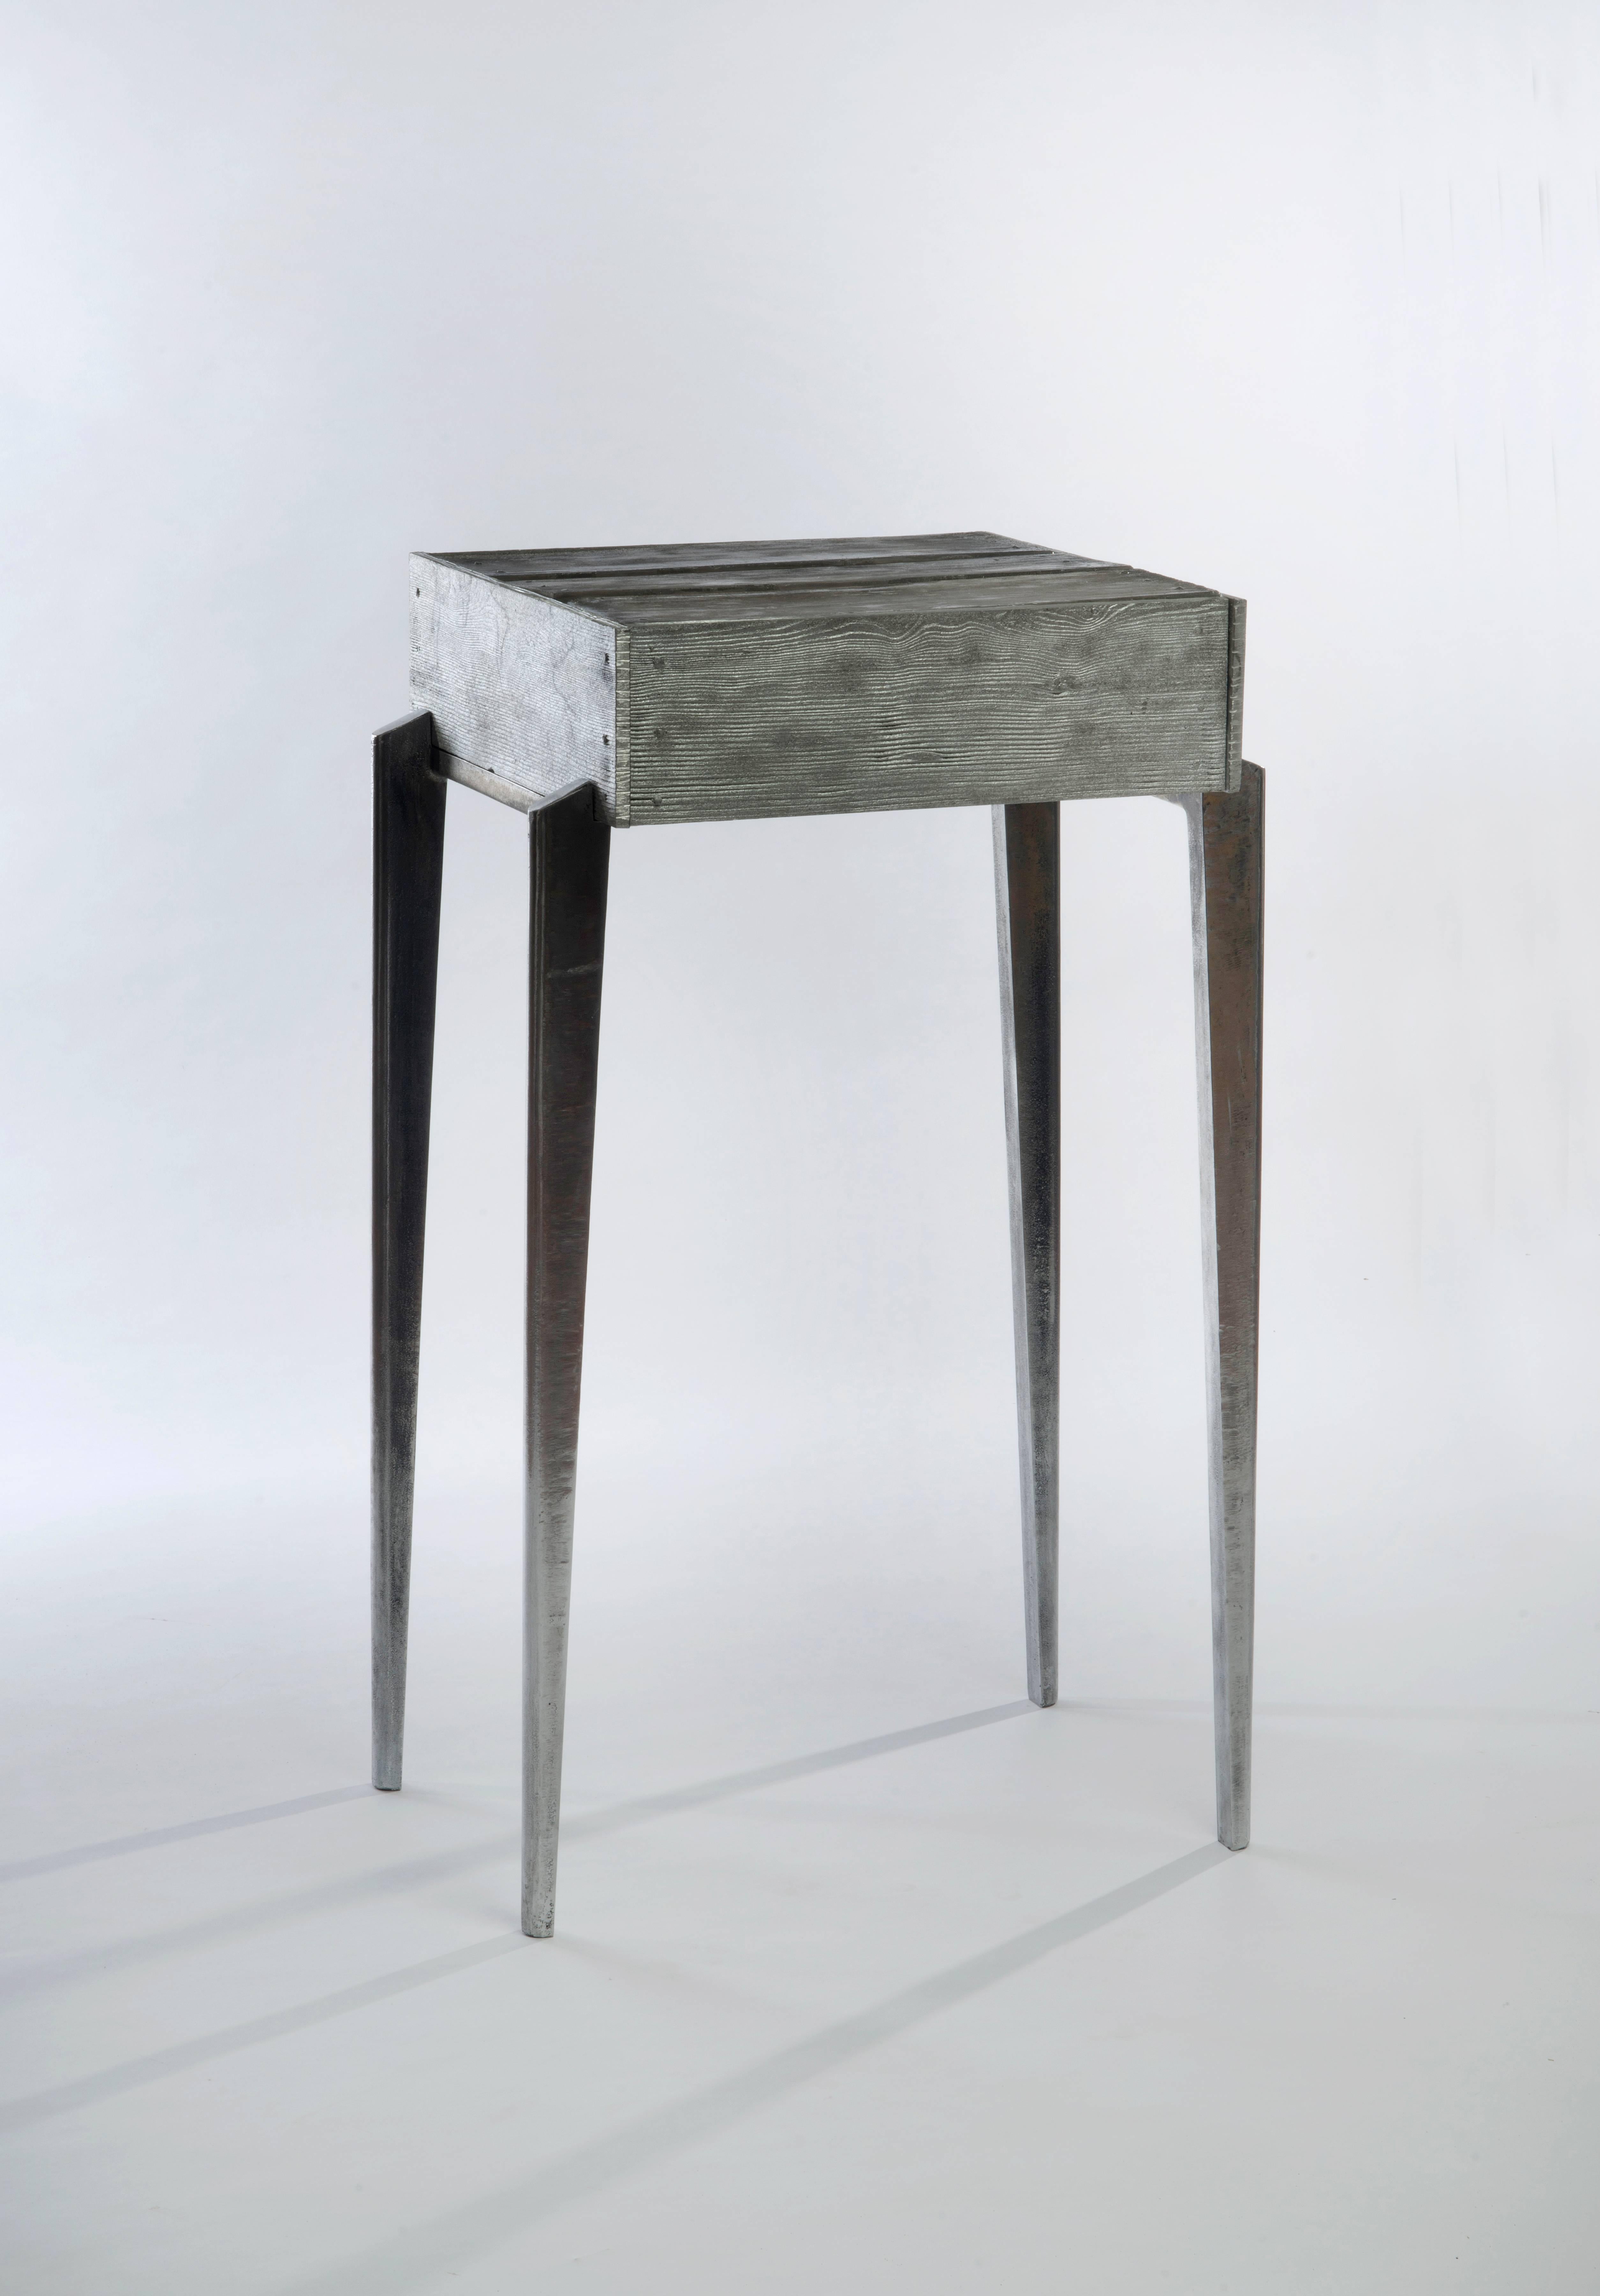 Gregory Nangle
Aluminum Shack Side Table, 2017
Cast aluminum, mirrored glass
22 x 18 x 38 in

The Gregory Nangle aesthetic explores what happens when geometry is interjected into nature. His work juxtaposes Minimalist geometry with forms or essences